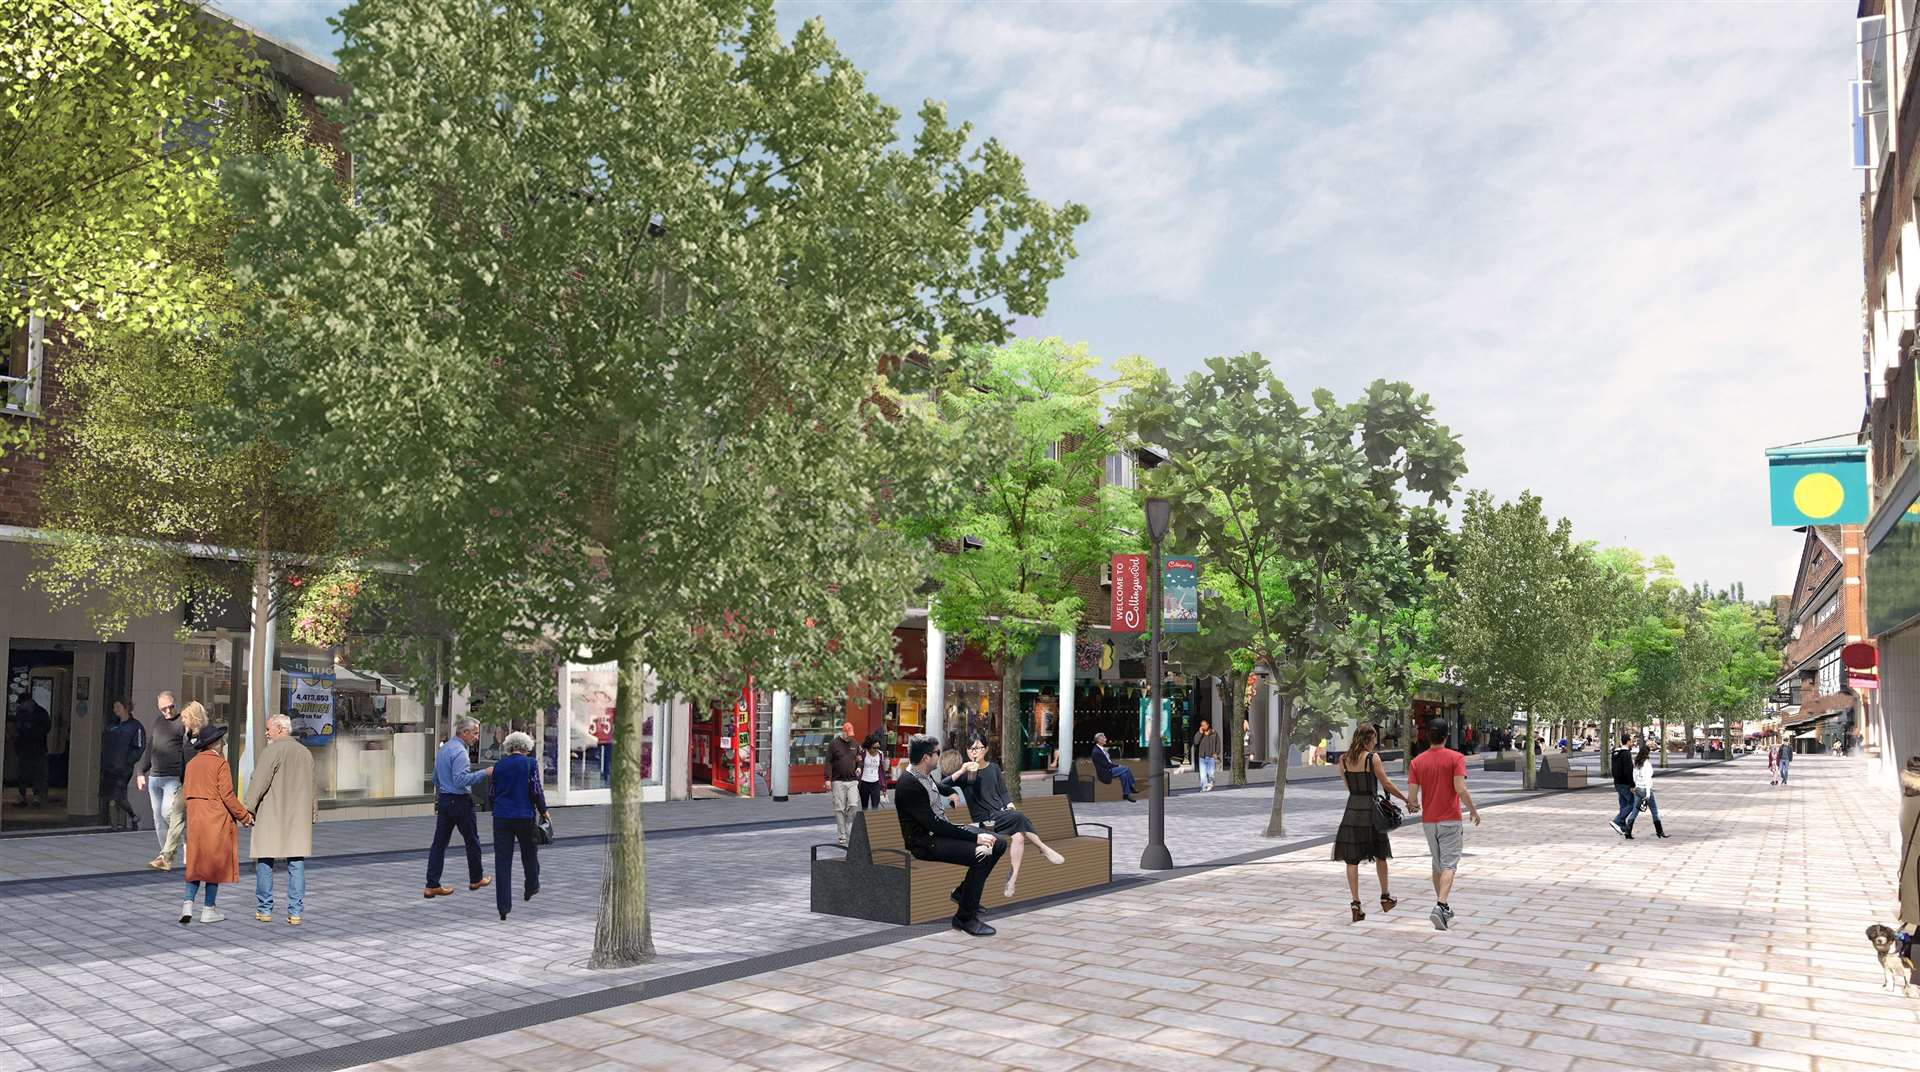 The council wants to turn St George's Street in Canterbury into a leafy boulevard